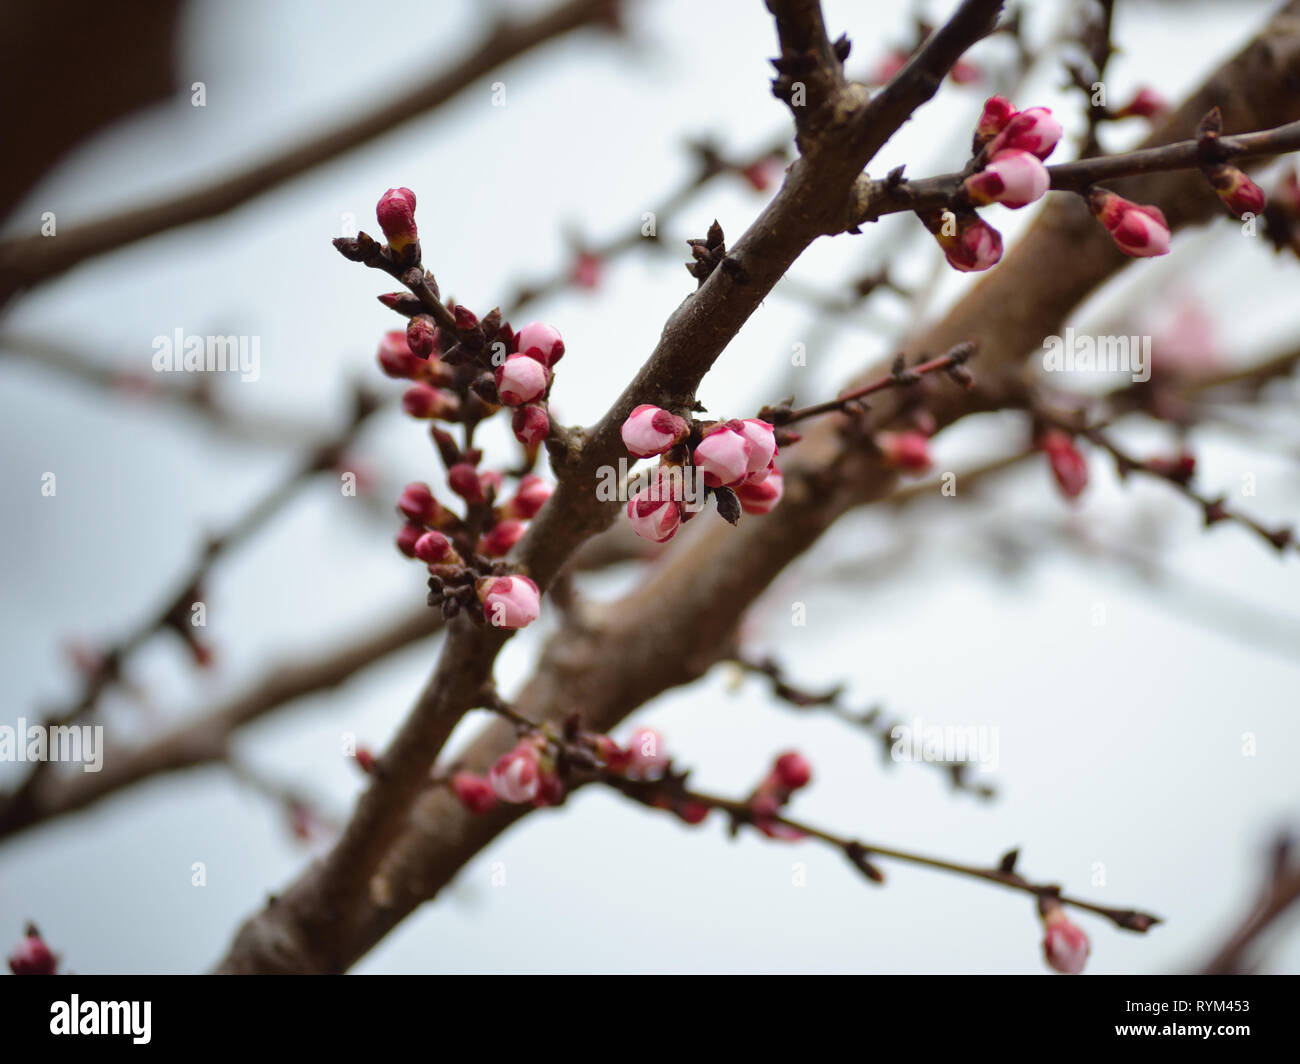 Branches with apricot buds Stock Photo